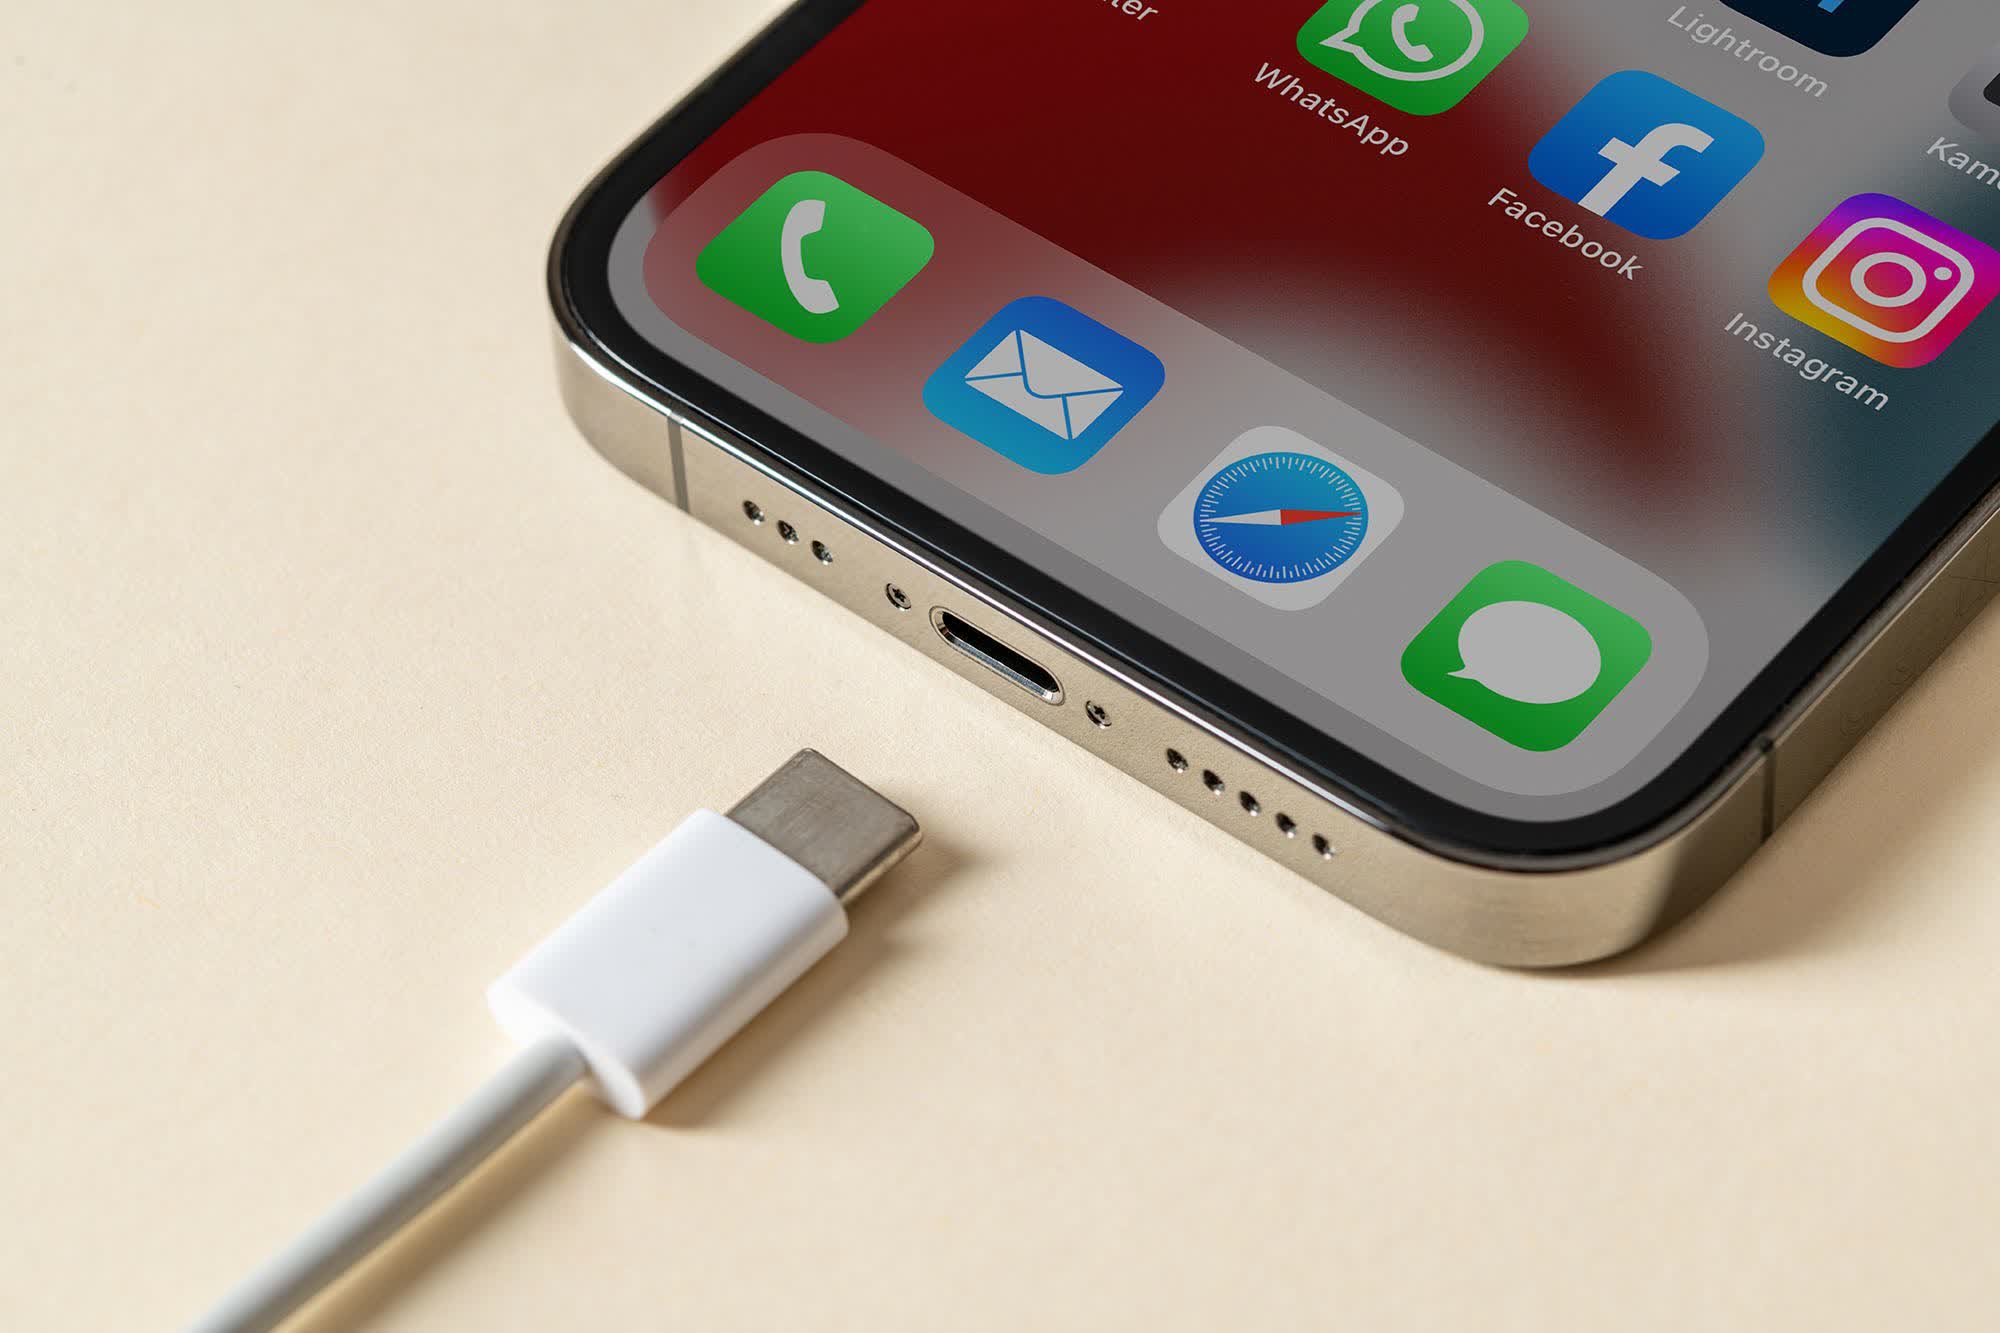 Apple warned not to throttle charging and data speeds of non-MFi (made for iPhone) USB-C cables